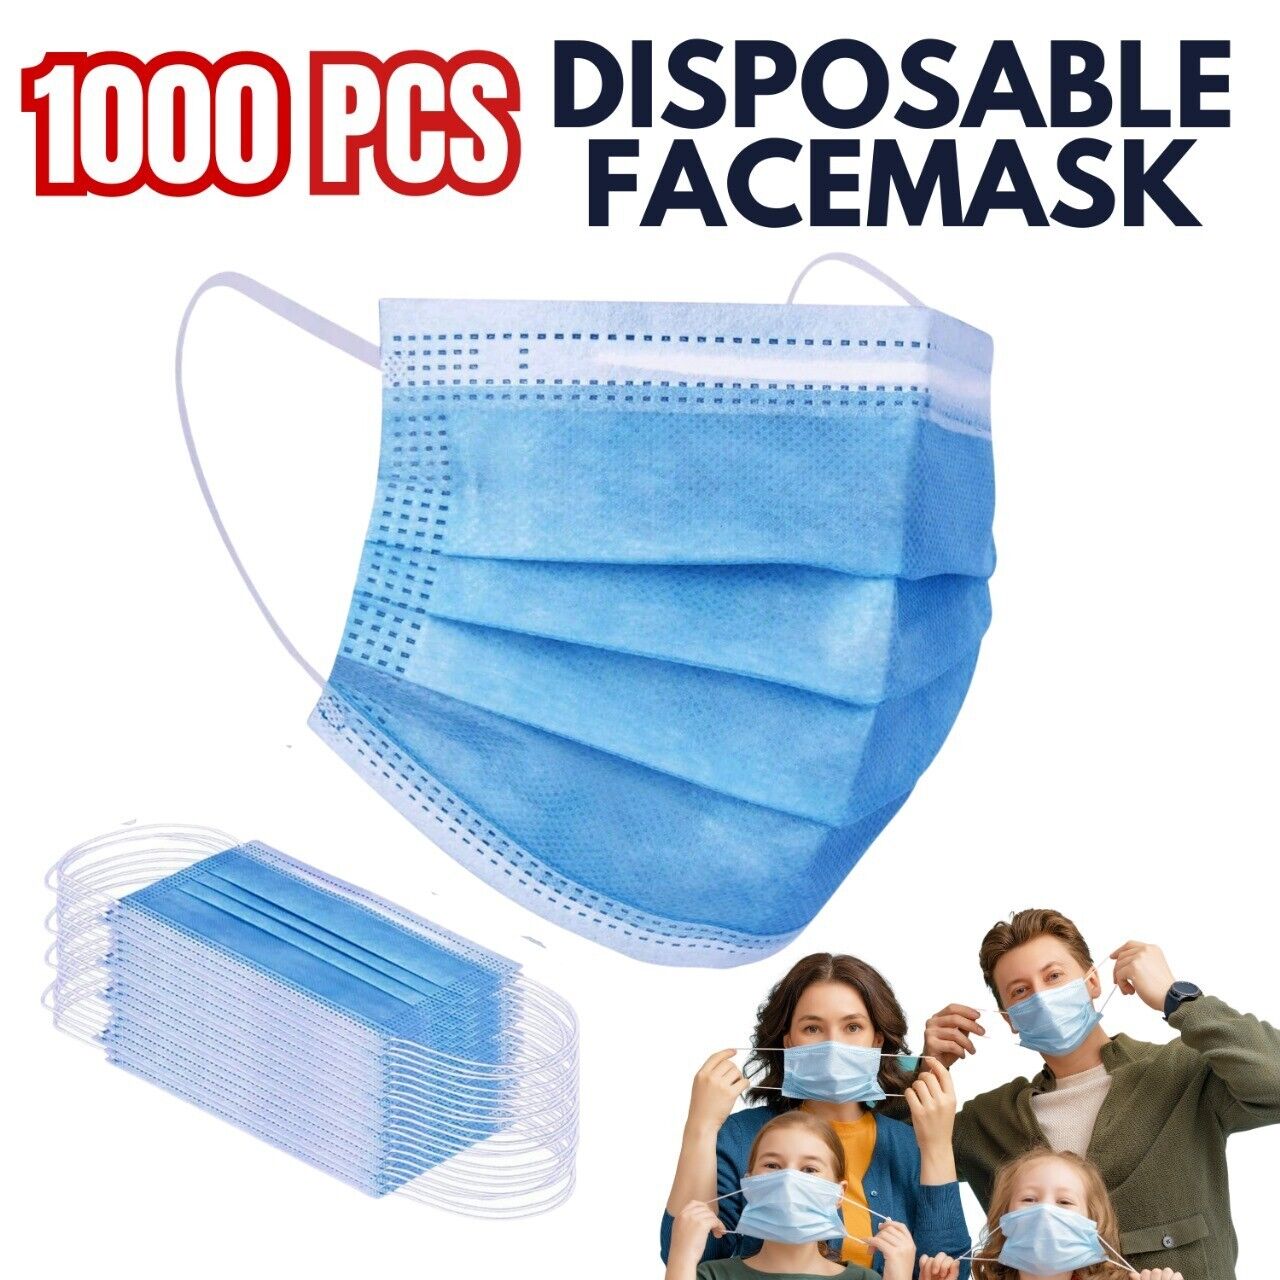 1000 PCS Protective Disposable Face Mask Cover 3 Ply Disposable Masks - Blue